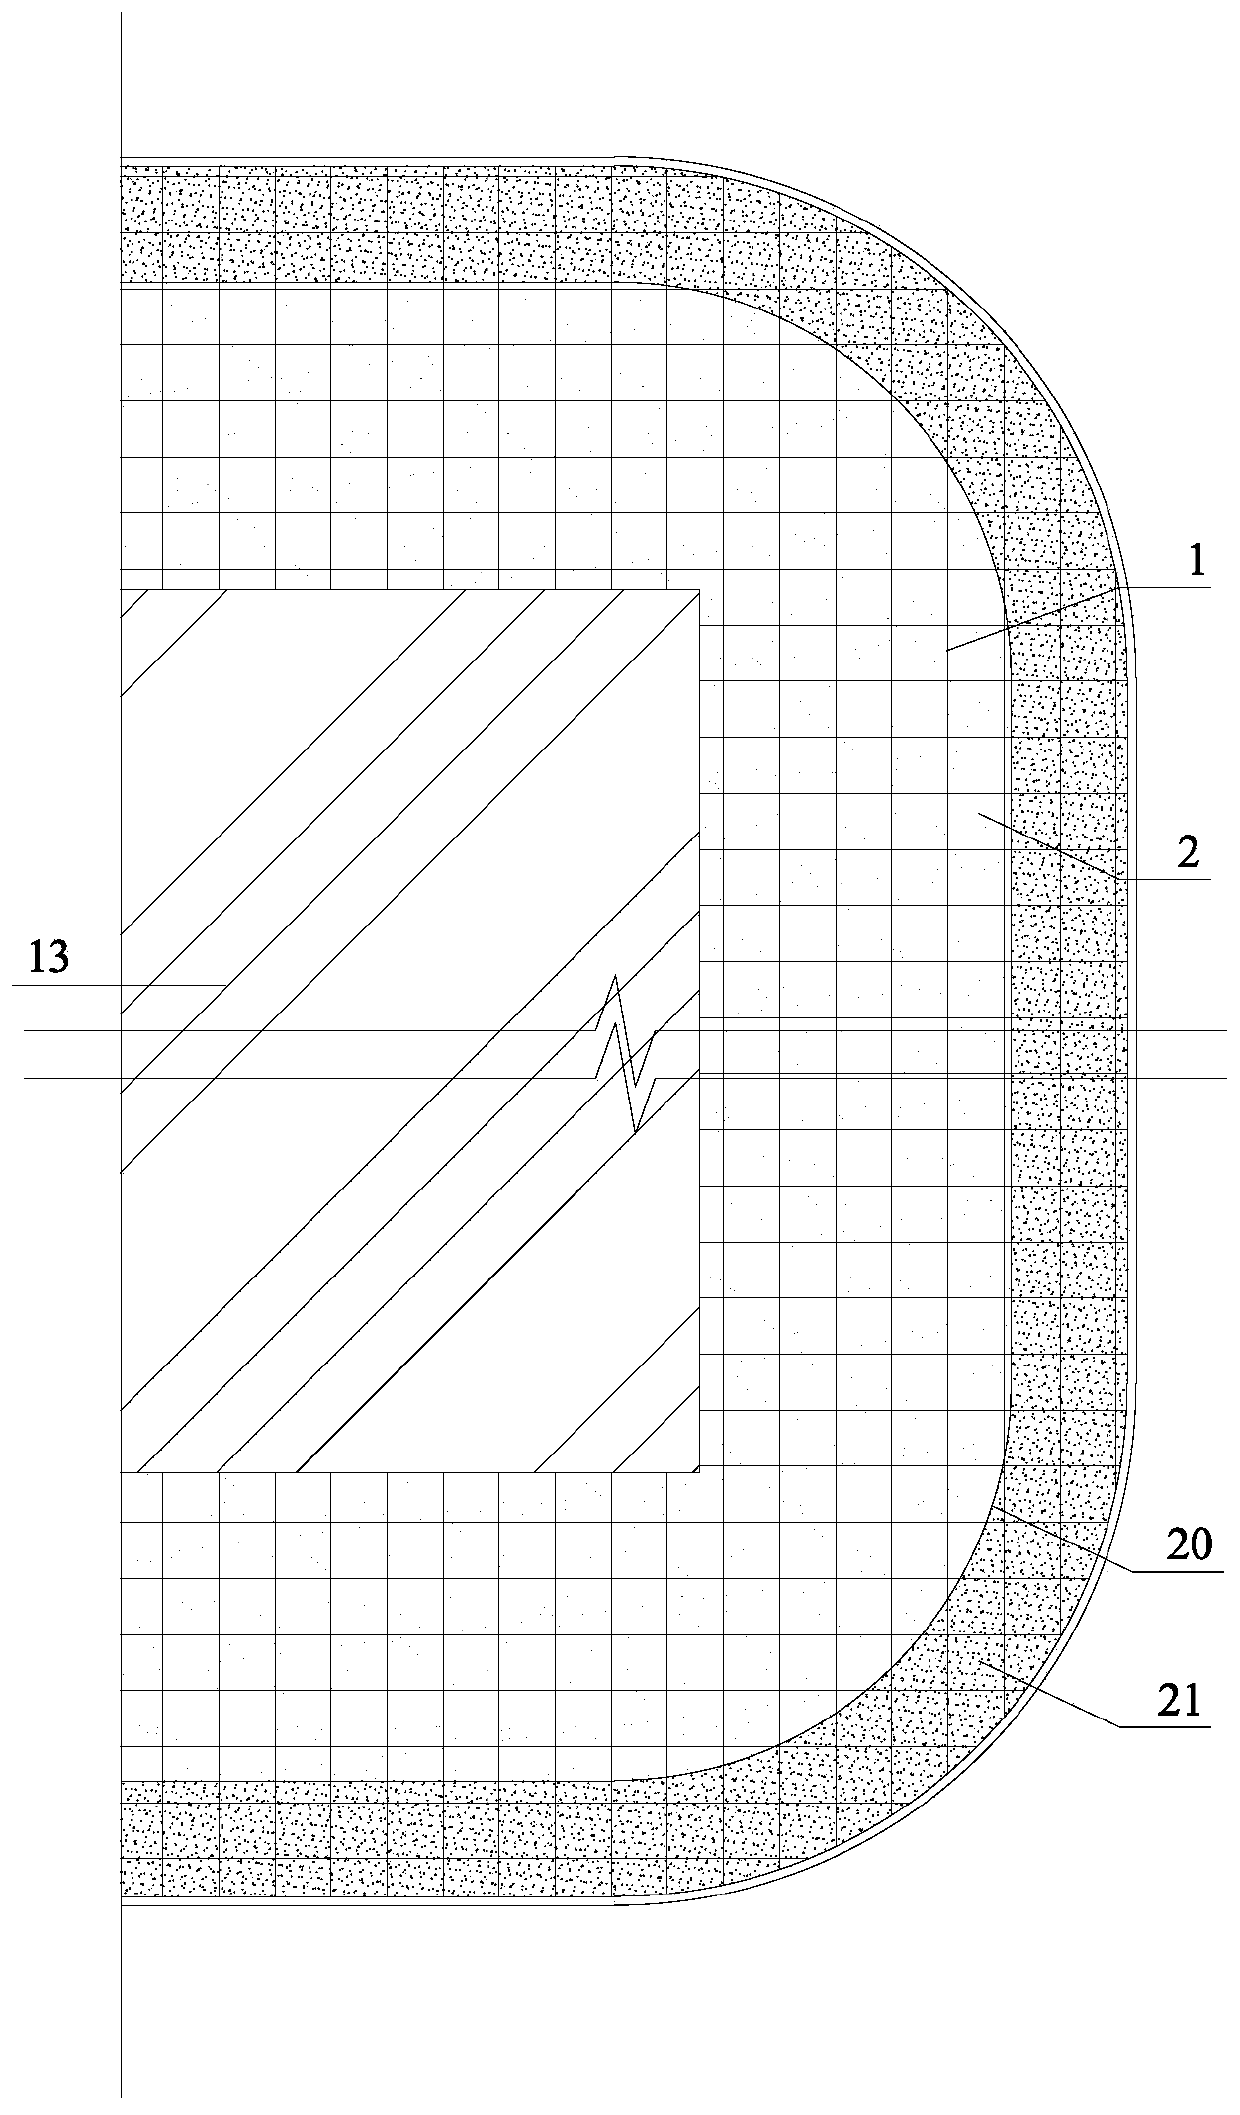 Ecological protection construction method of stepped 3D stiffened bridge abutment conical slope